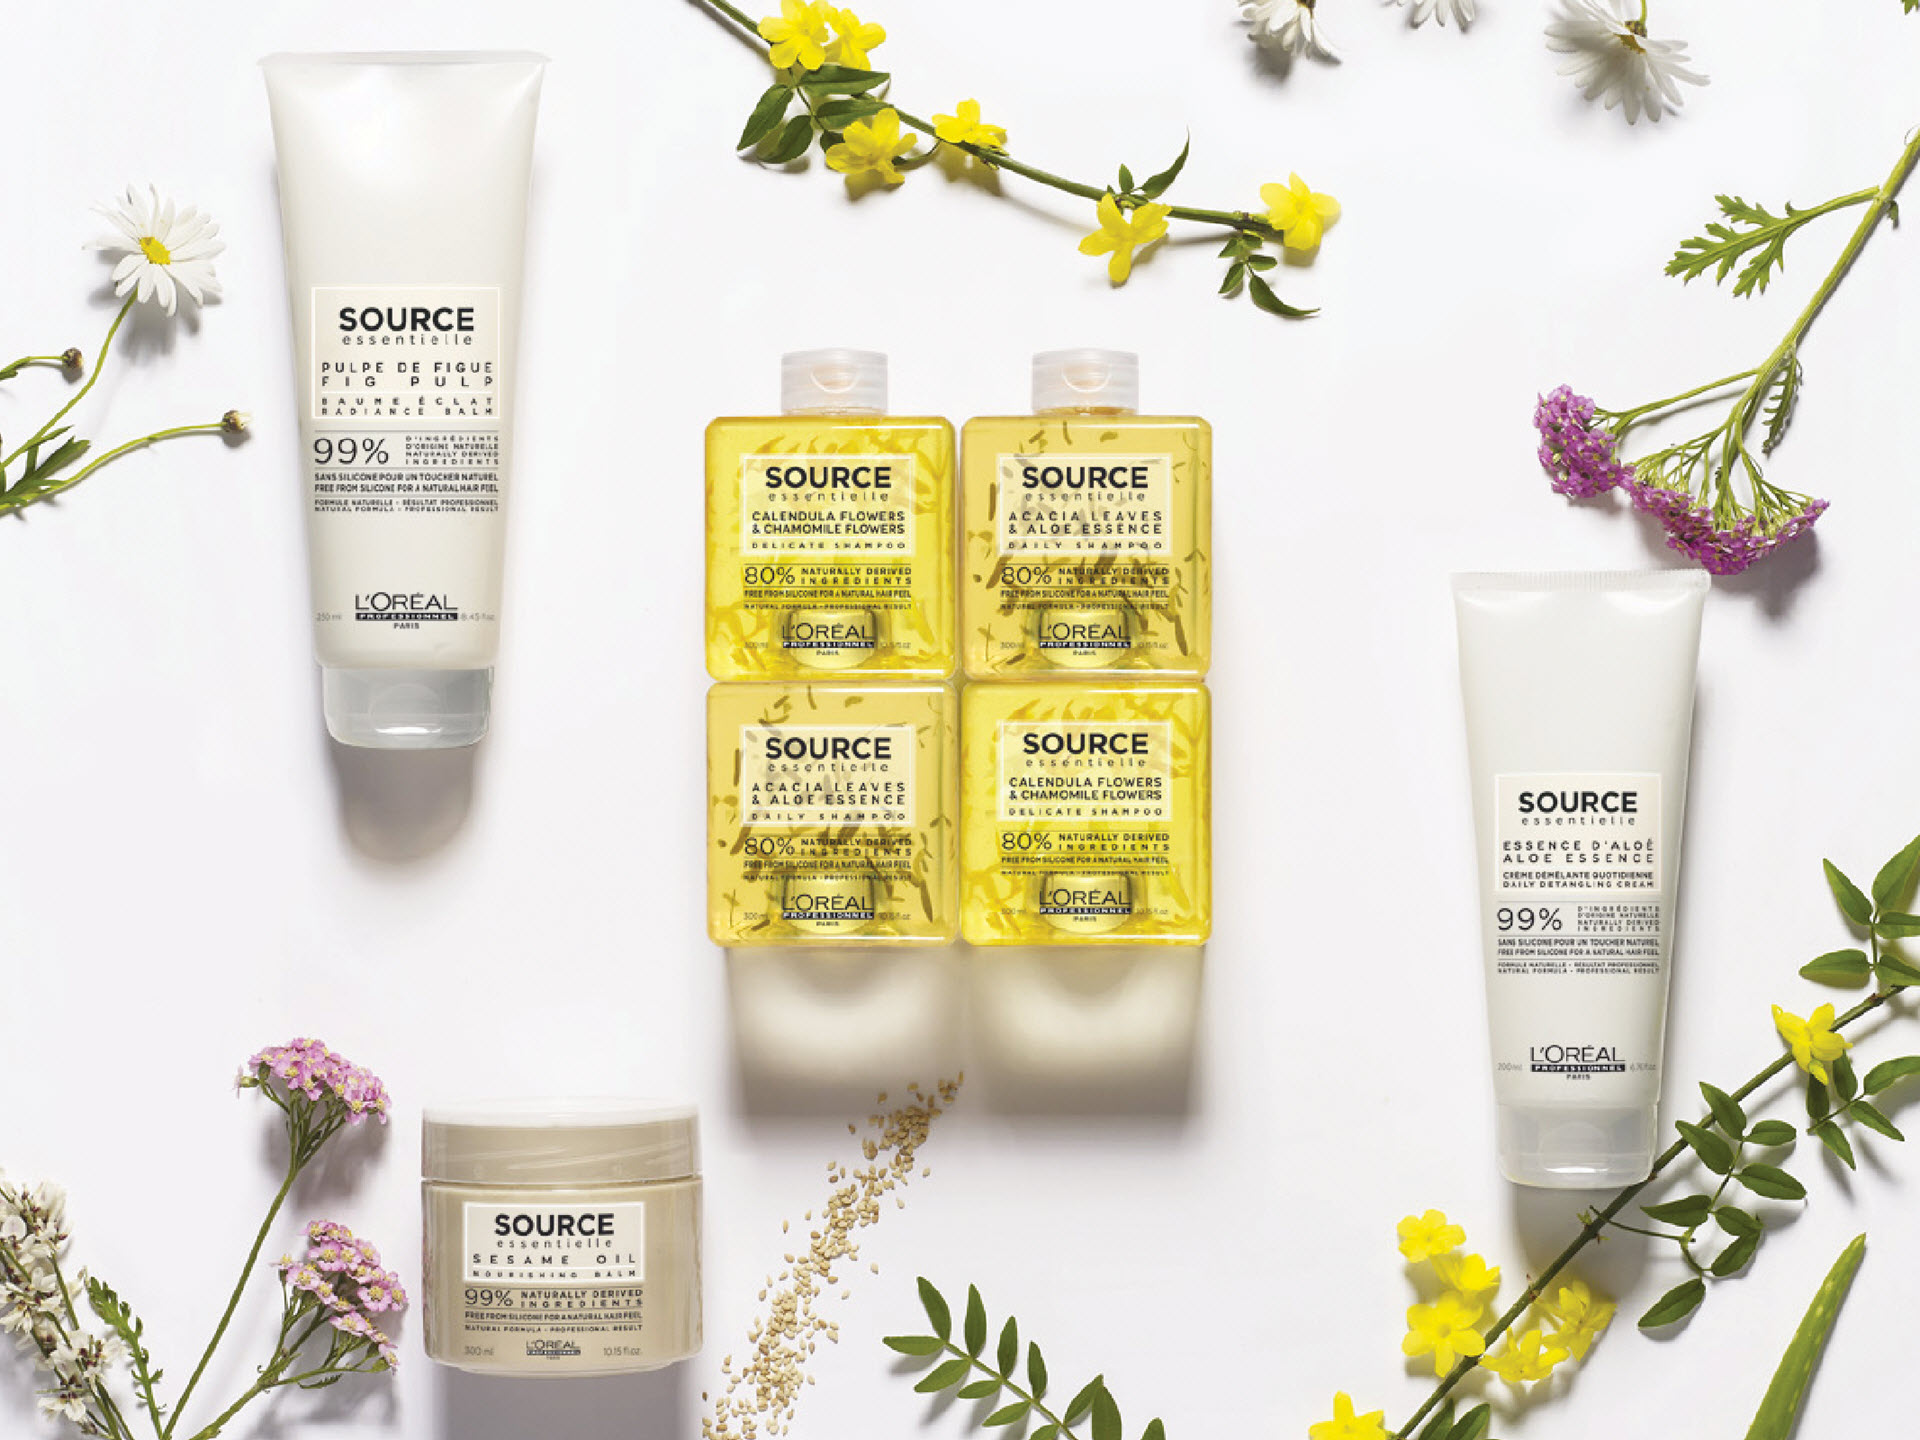 L’Oréal Professionnel Launches New Natural Game-Changer With Source Essentielle